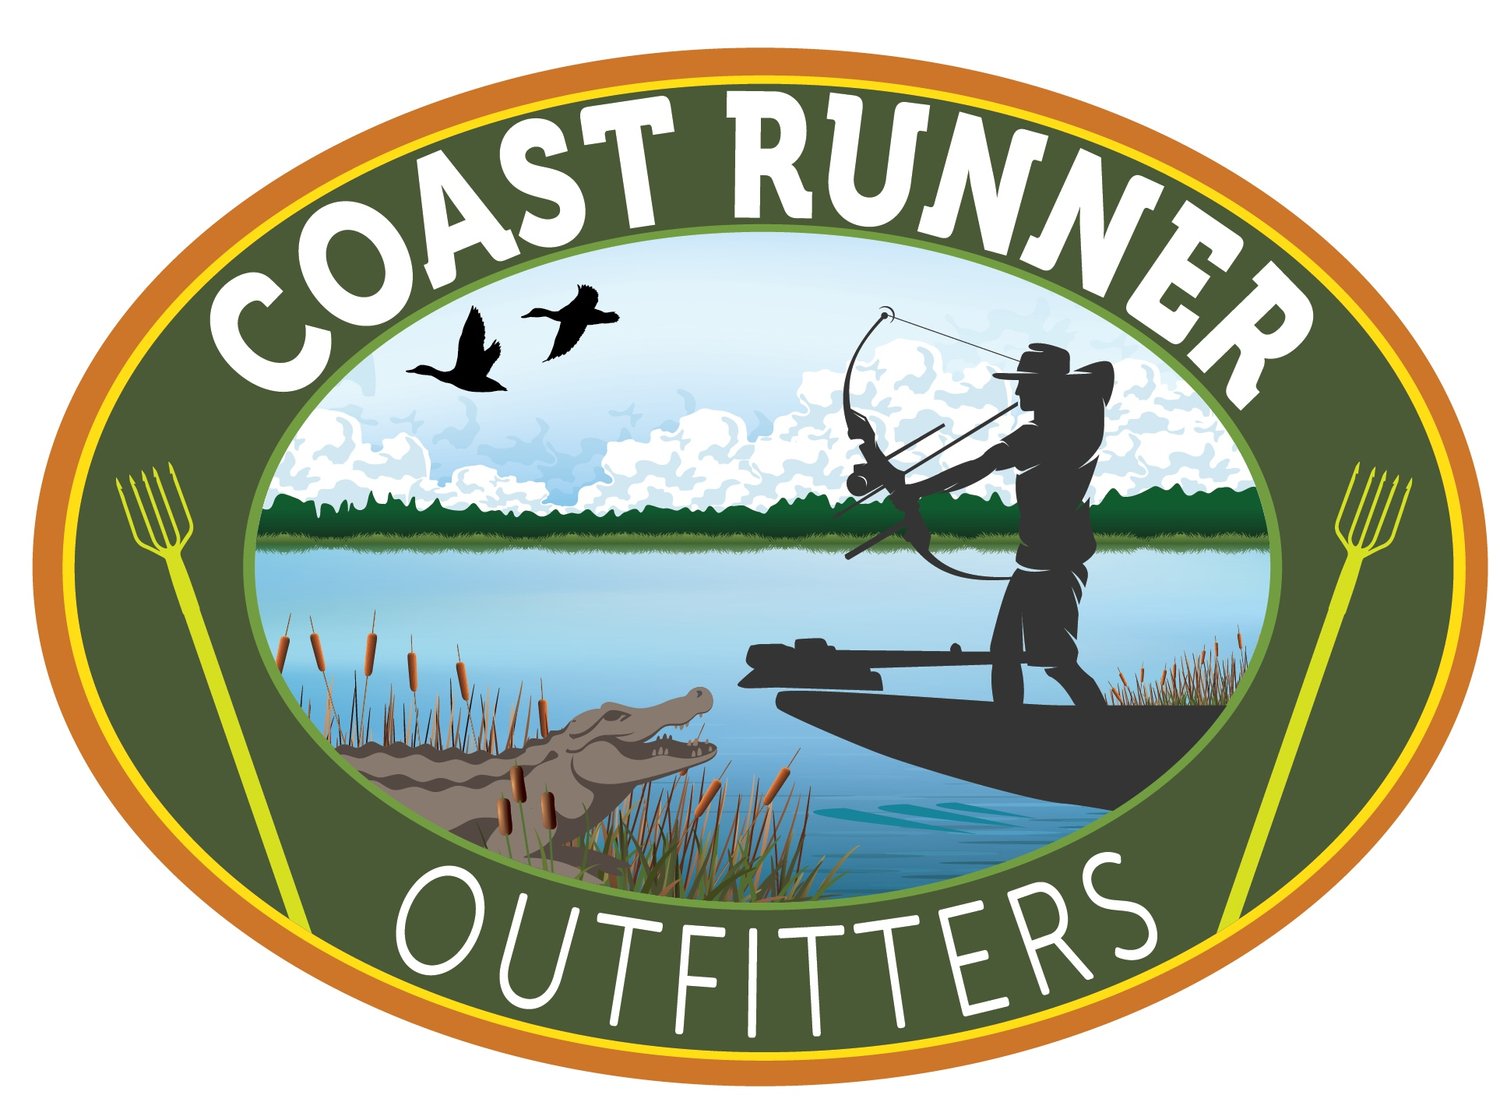 Coast Runner Outfitters